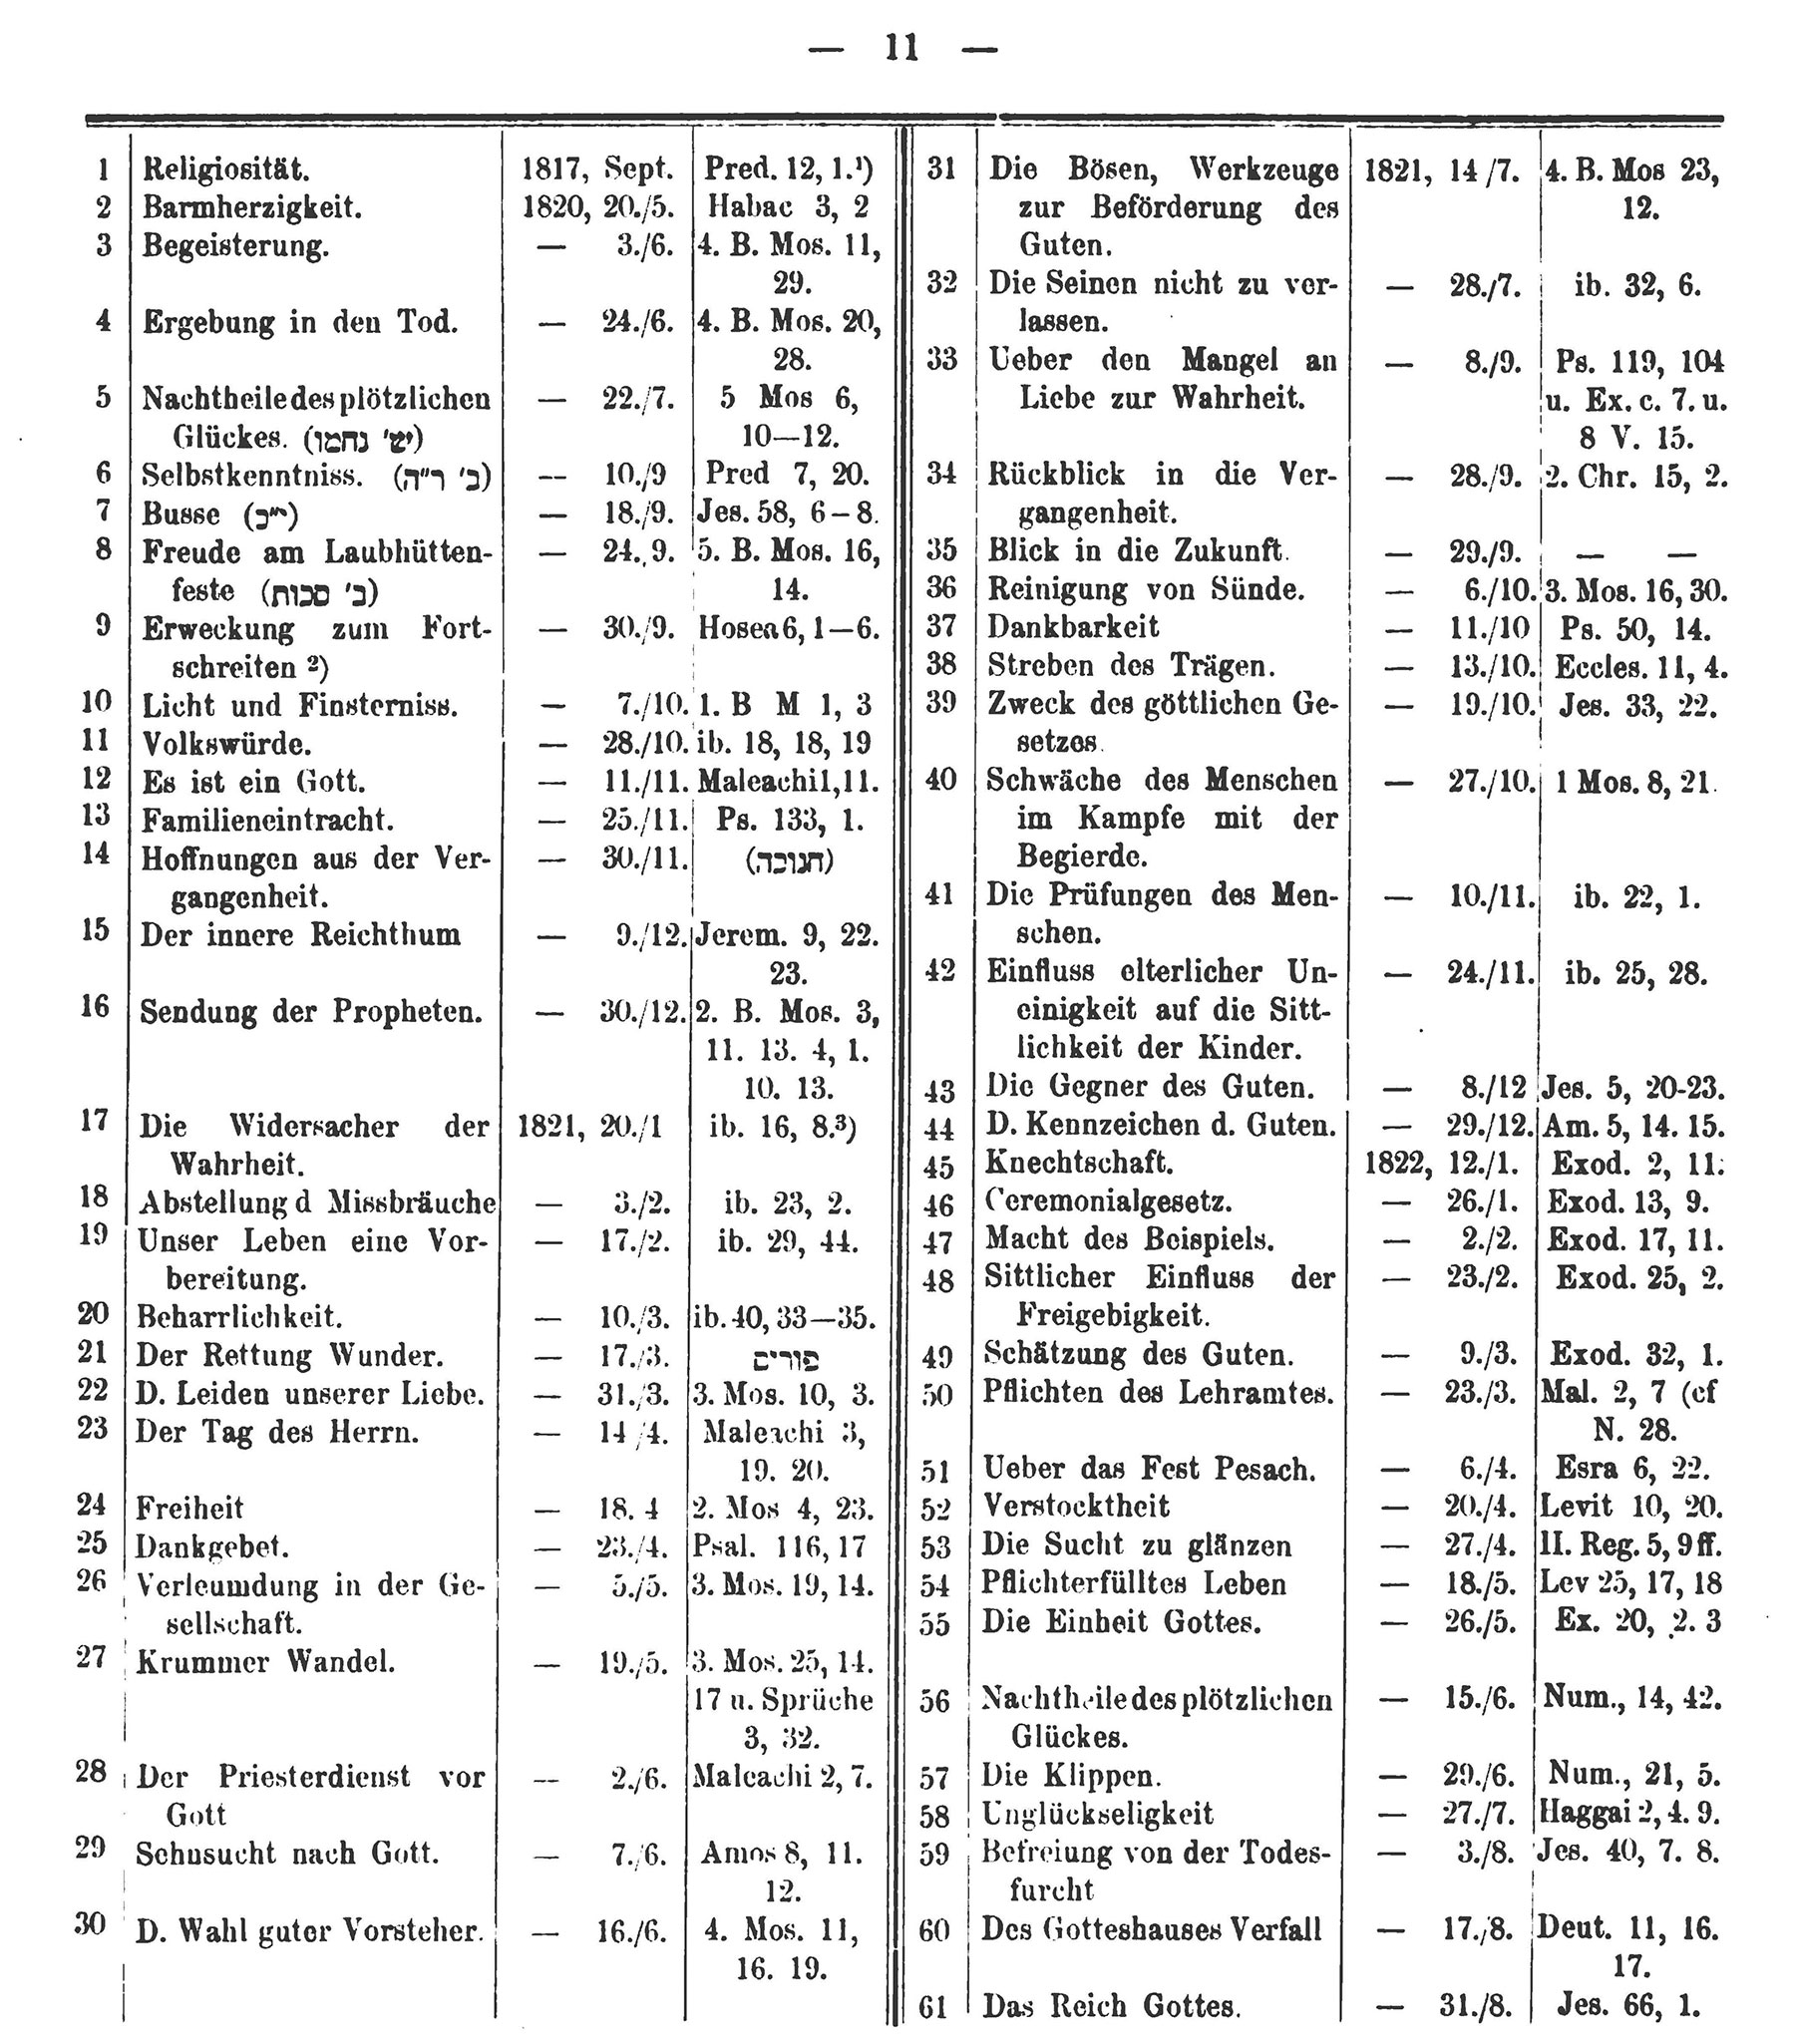 Maybaum's reproduction of a chart that Zunz prepared documenting all the sermons he had given at the German Synagogue in Berlin